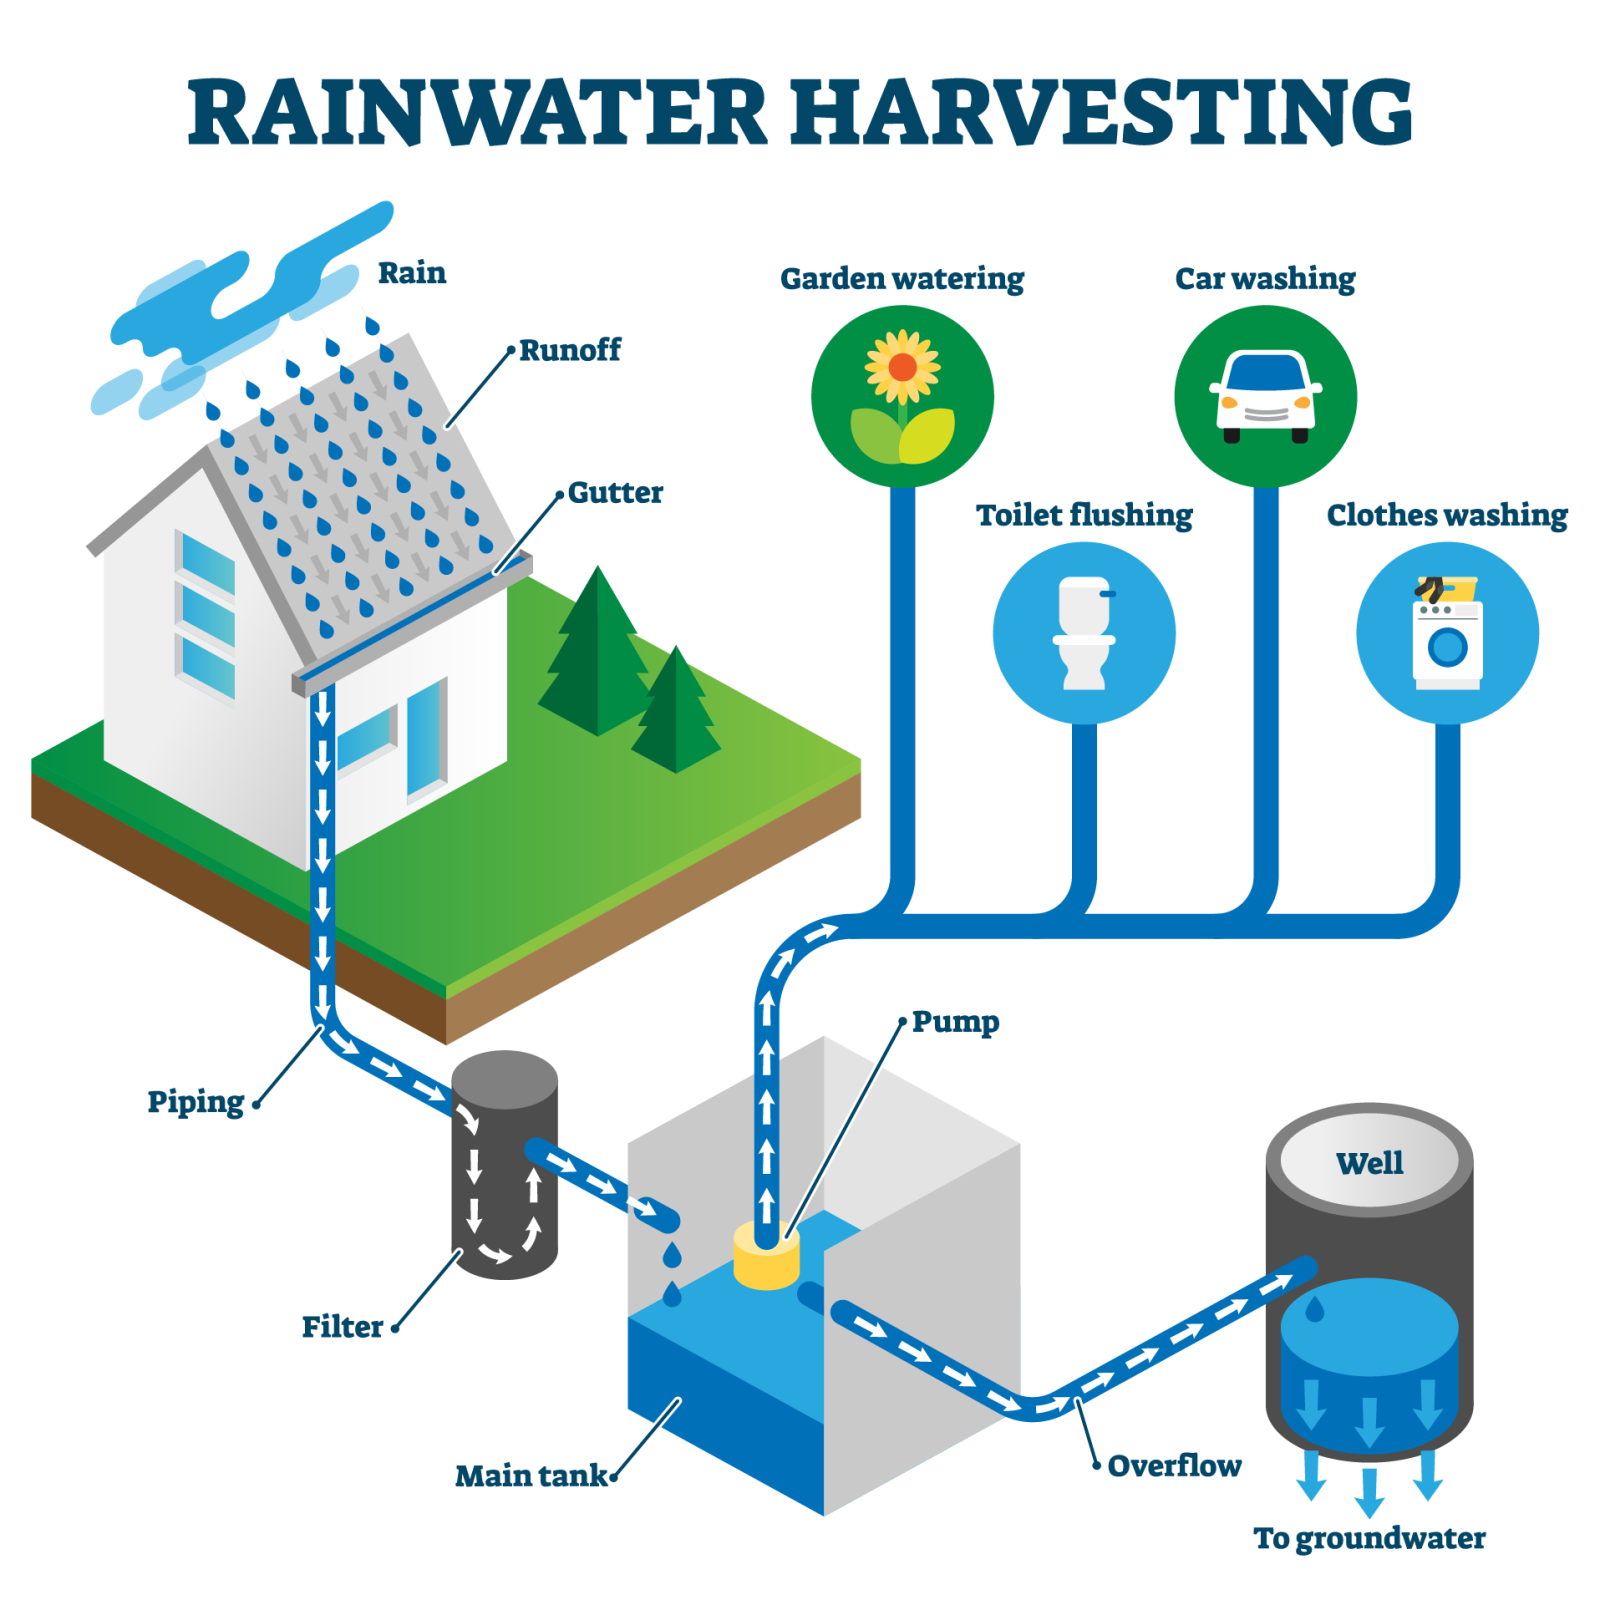 Rainwater harvesting is a great energy saving tip for a net zero home.